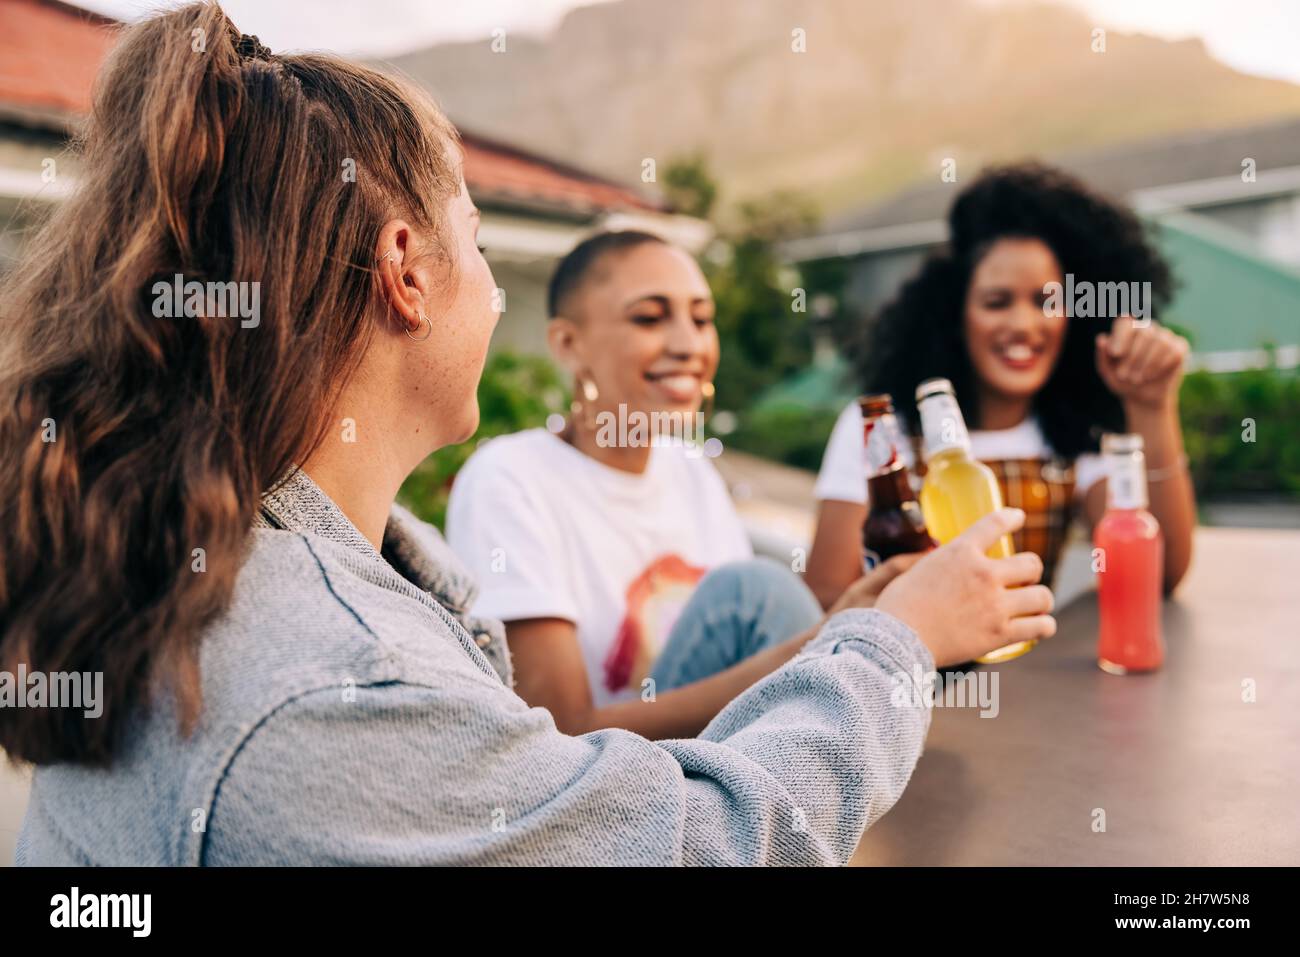 Toasting to friendship. Happy young woman making a toast with her friends on a rooftop. Group of three cheerful female friends enjoying some cold beer Stock Photo